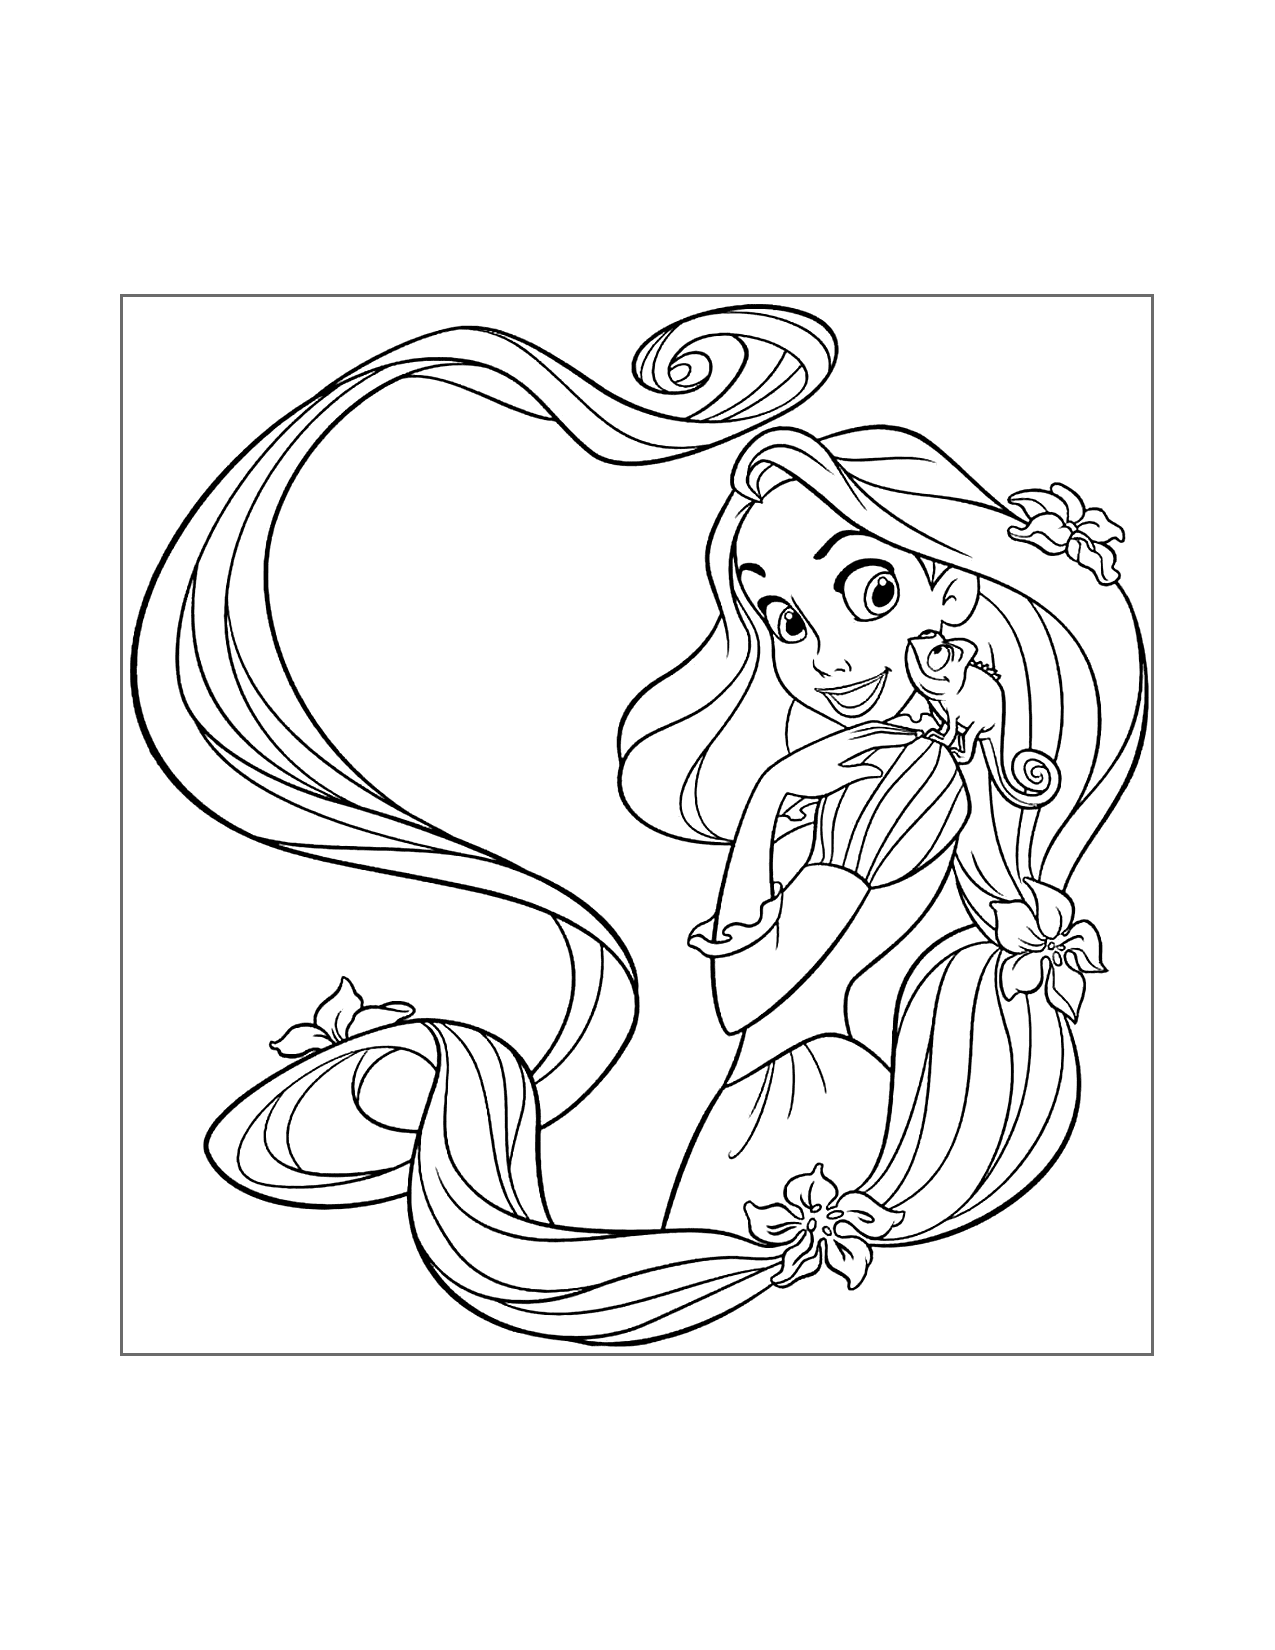 Rapunzel And Pascal Coloring Page